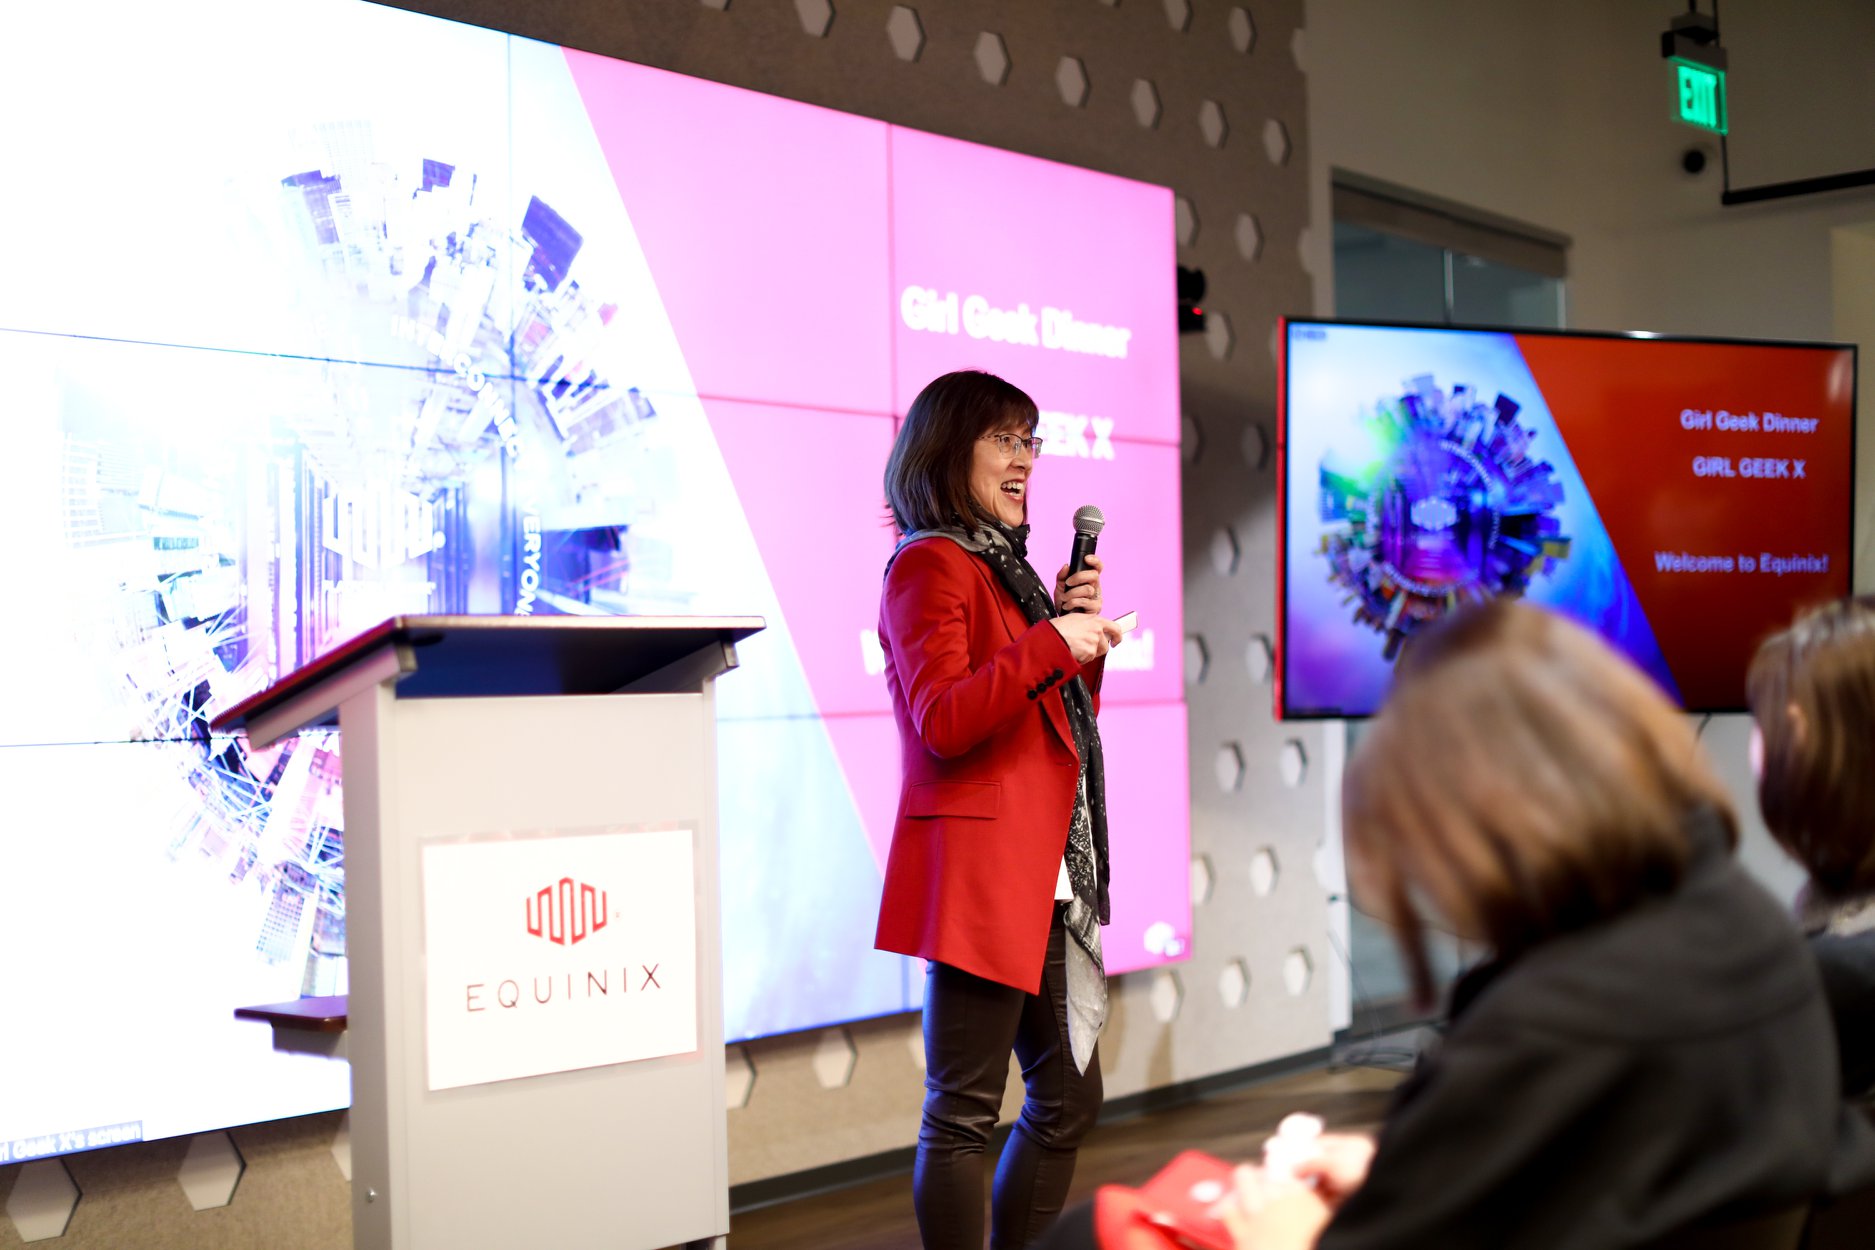 VP of Engineering Dr Yun Freund gives talk on “How To Thrive In The Male-Dominated Tech World” at Equinix Girl Geek Dinner 2019